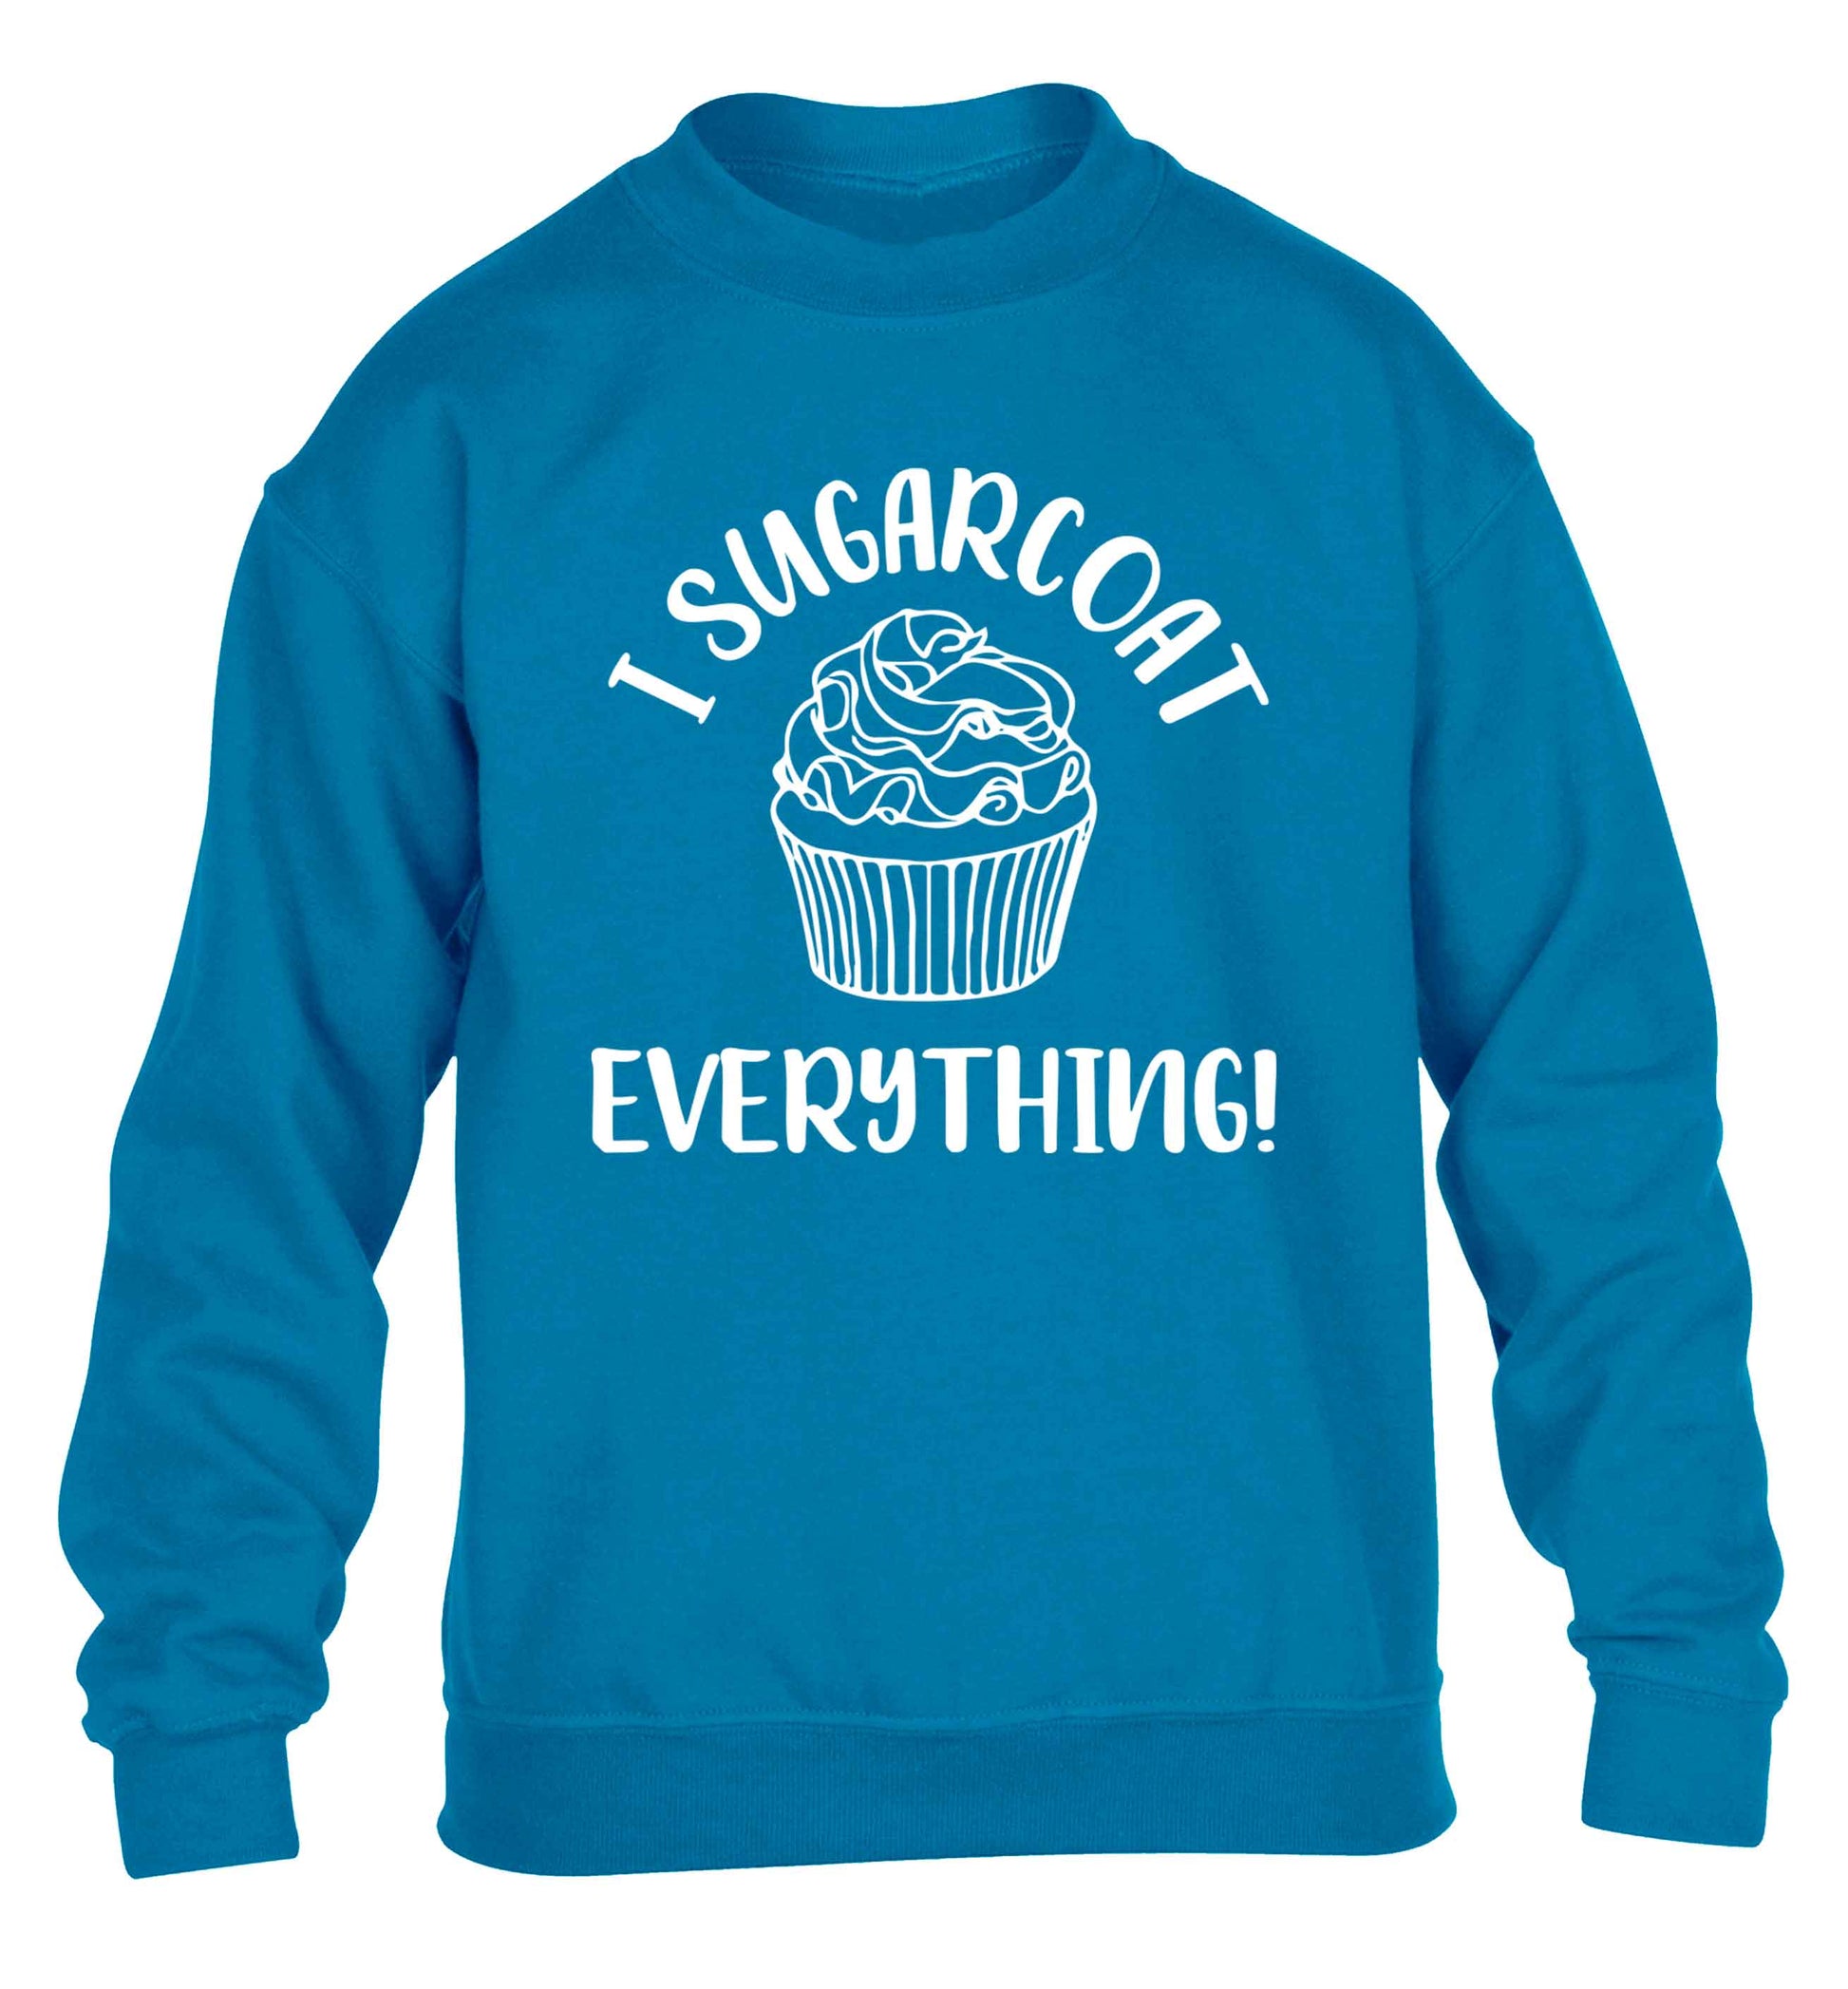 I sugarcoat everything children's blue sweater 12-13 Years